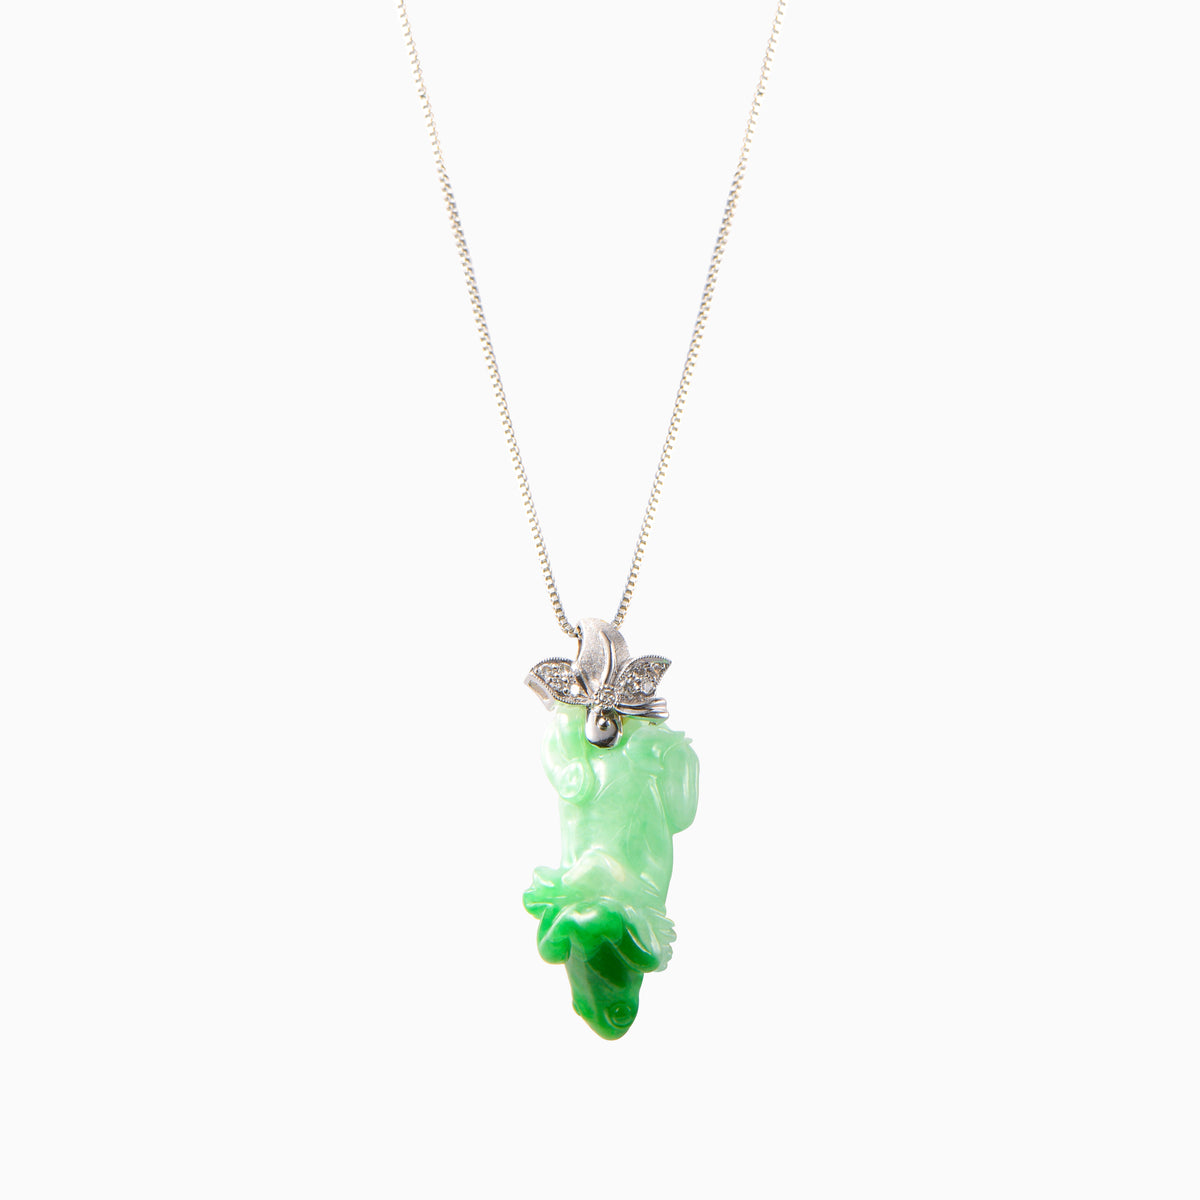 Green jade pendant shaped as a toad sitting on a cabbage with diamonds